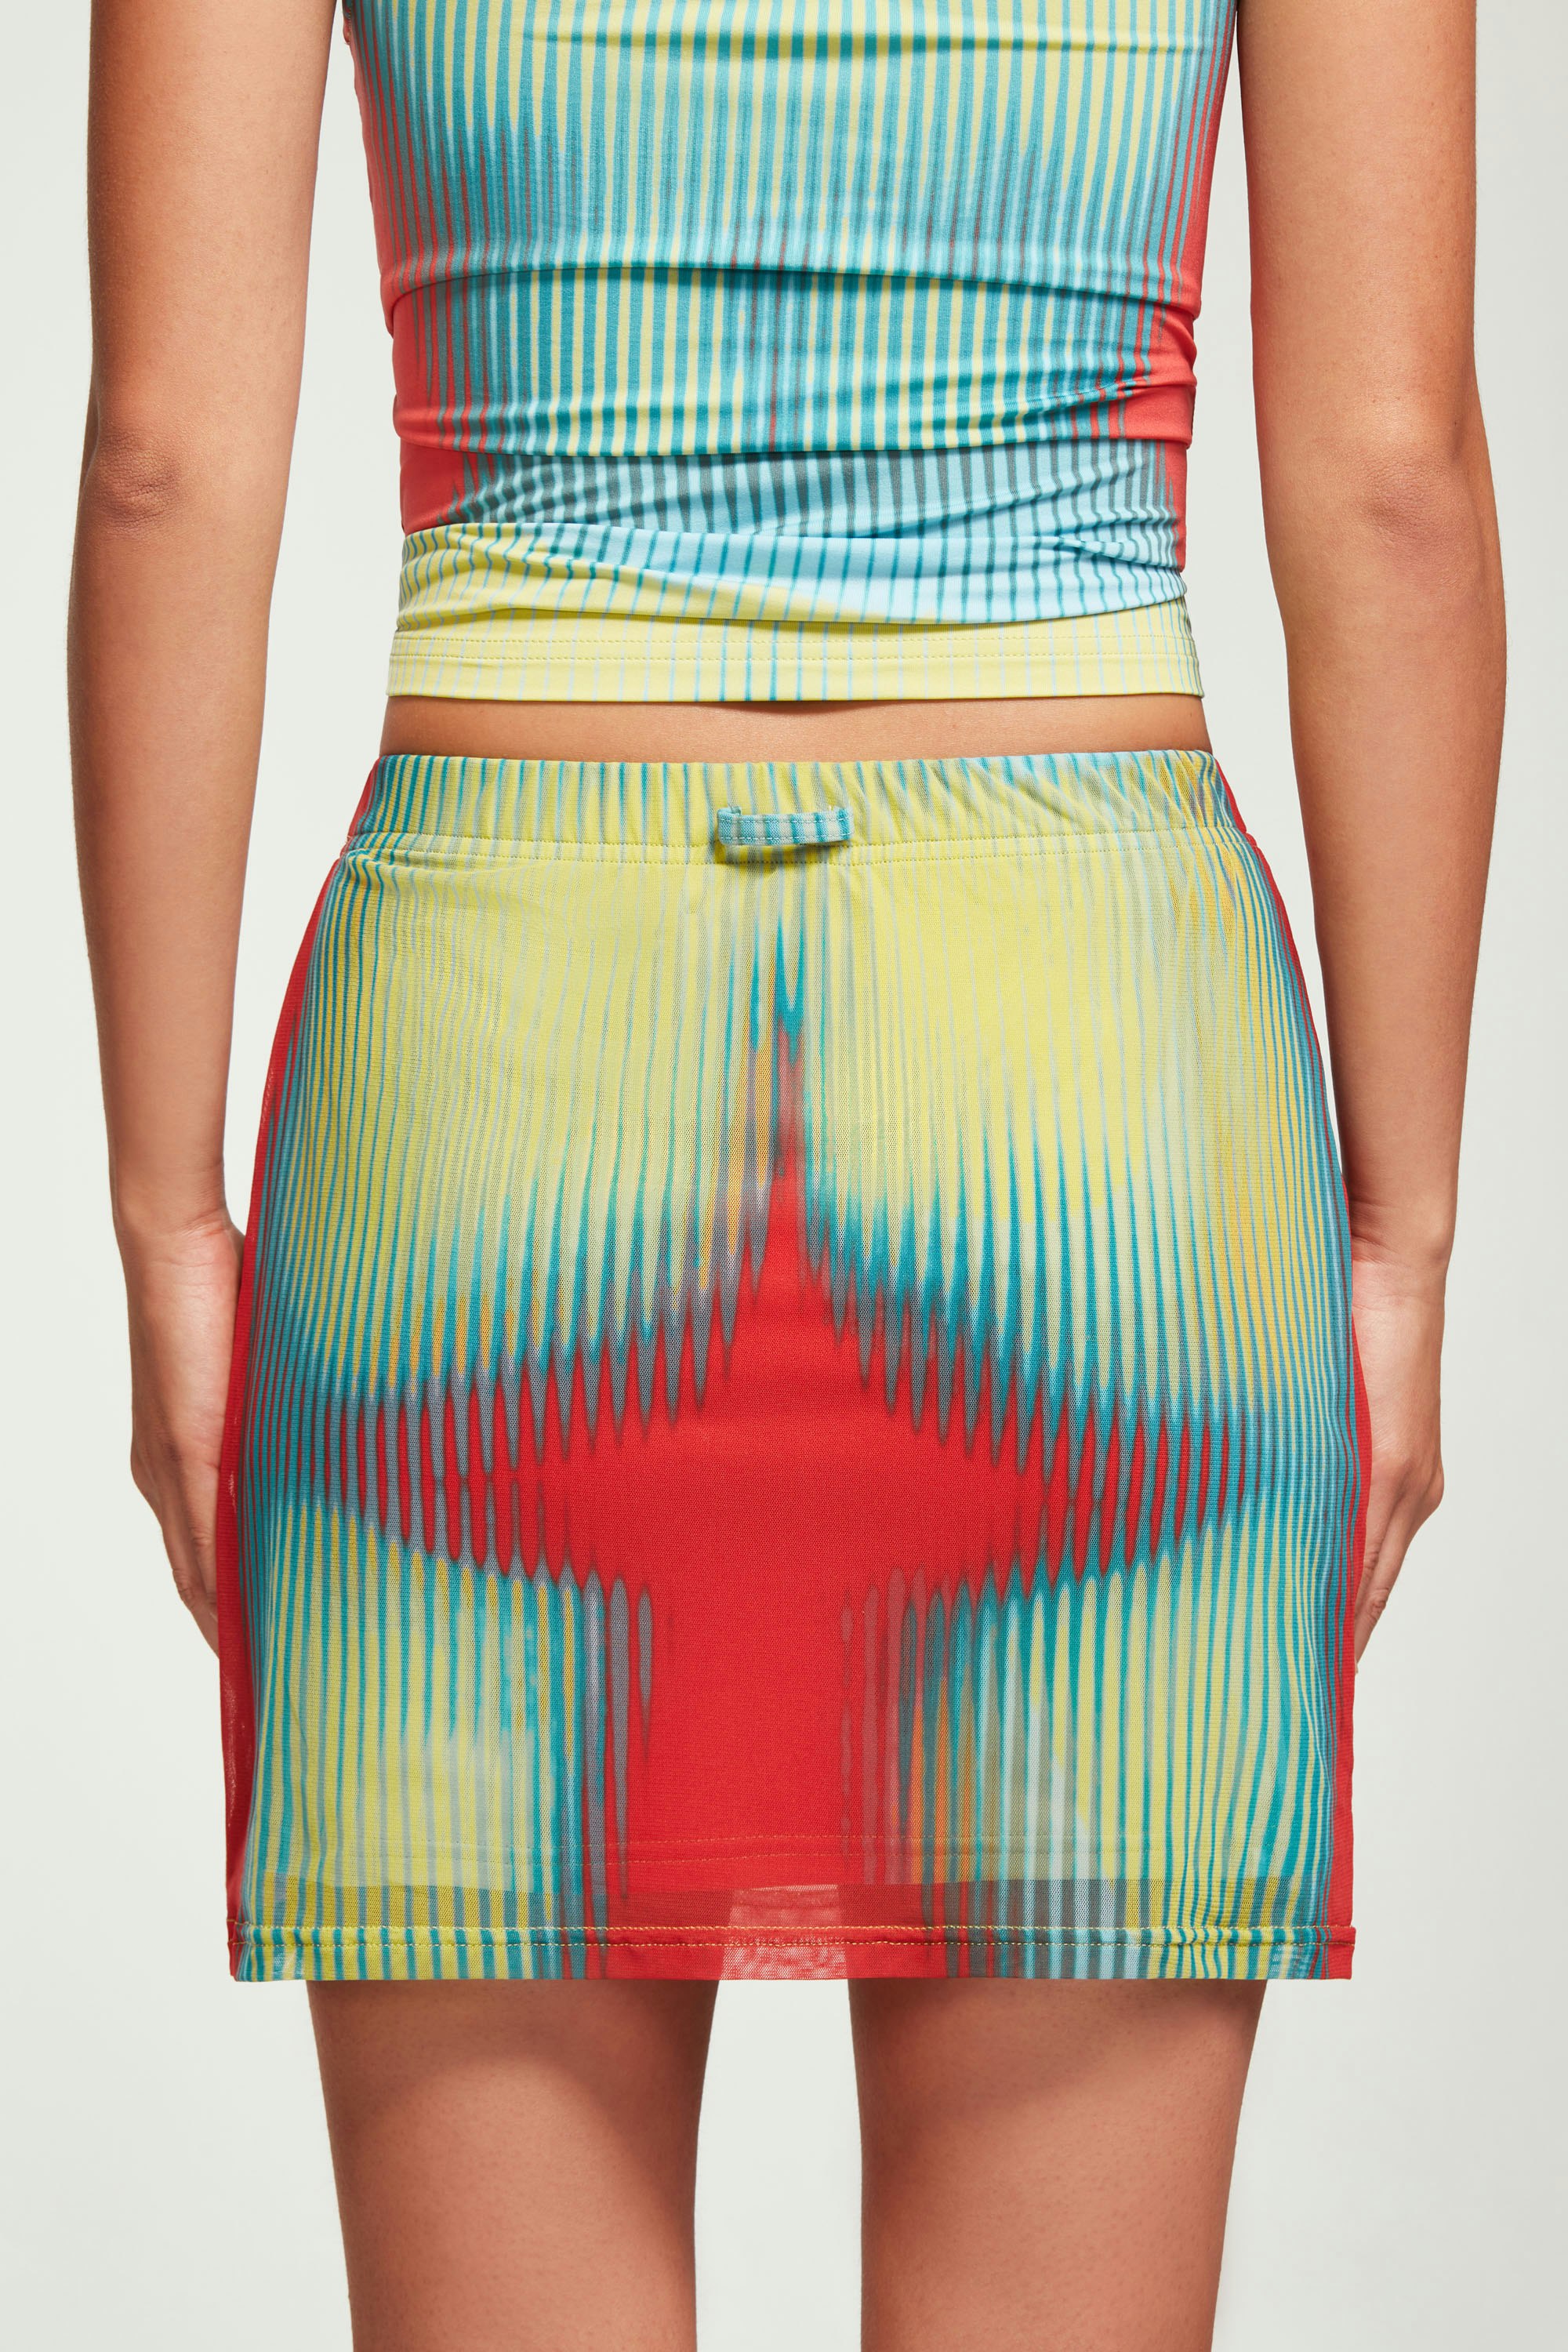 The Green & Red Body Morph Mini Skirt by Jean Paul Gaultier x Y/Project